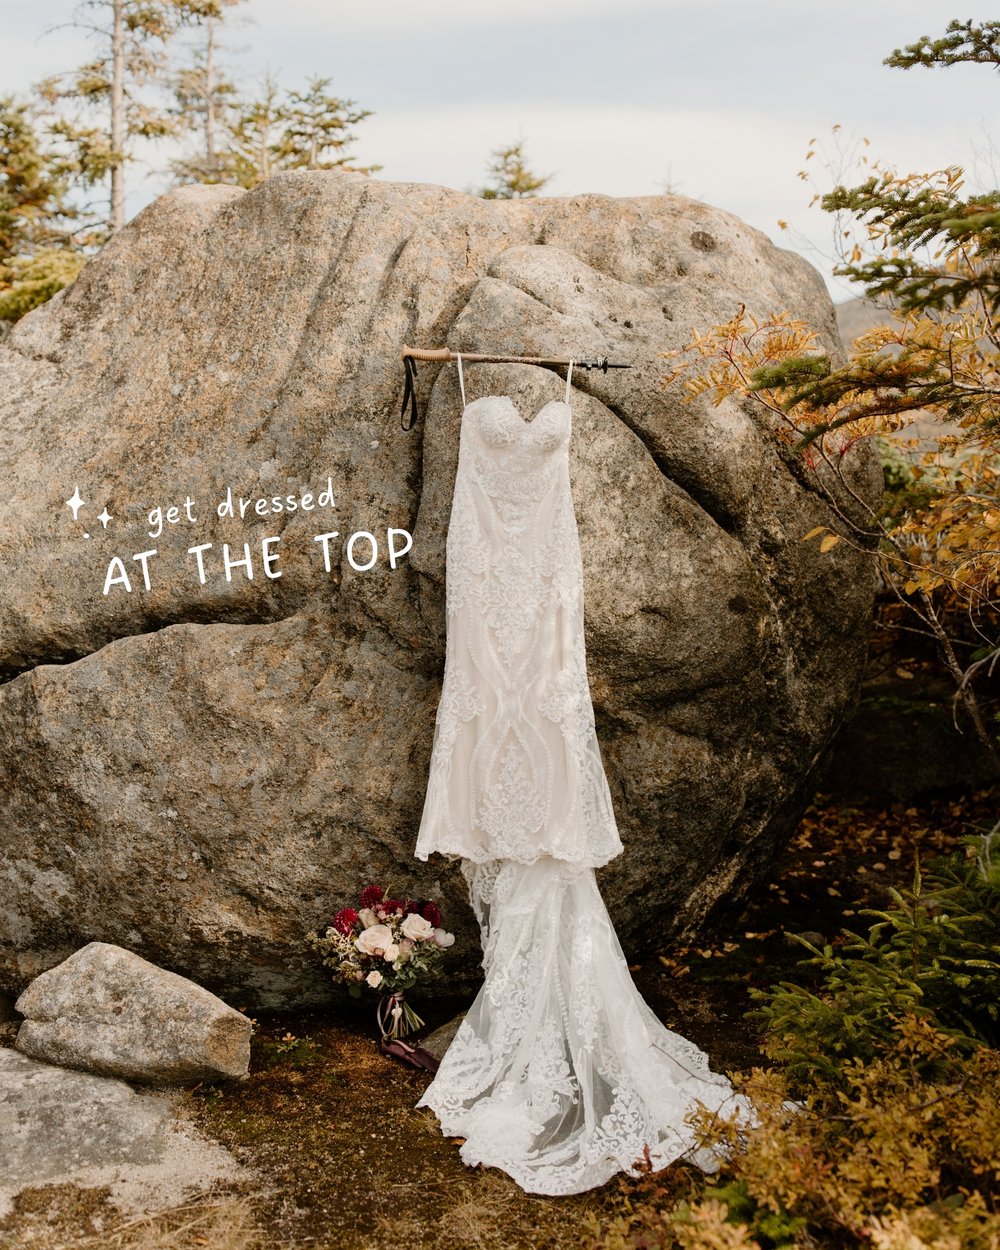 how-to-hike-with-wedding-dress-elopement-5.jpg